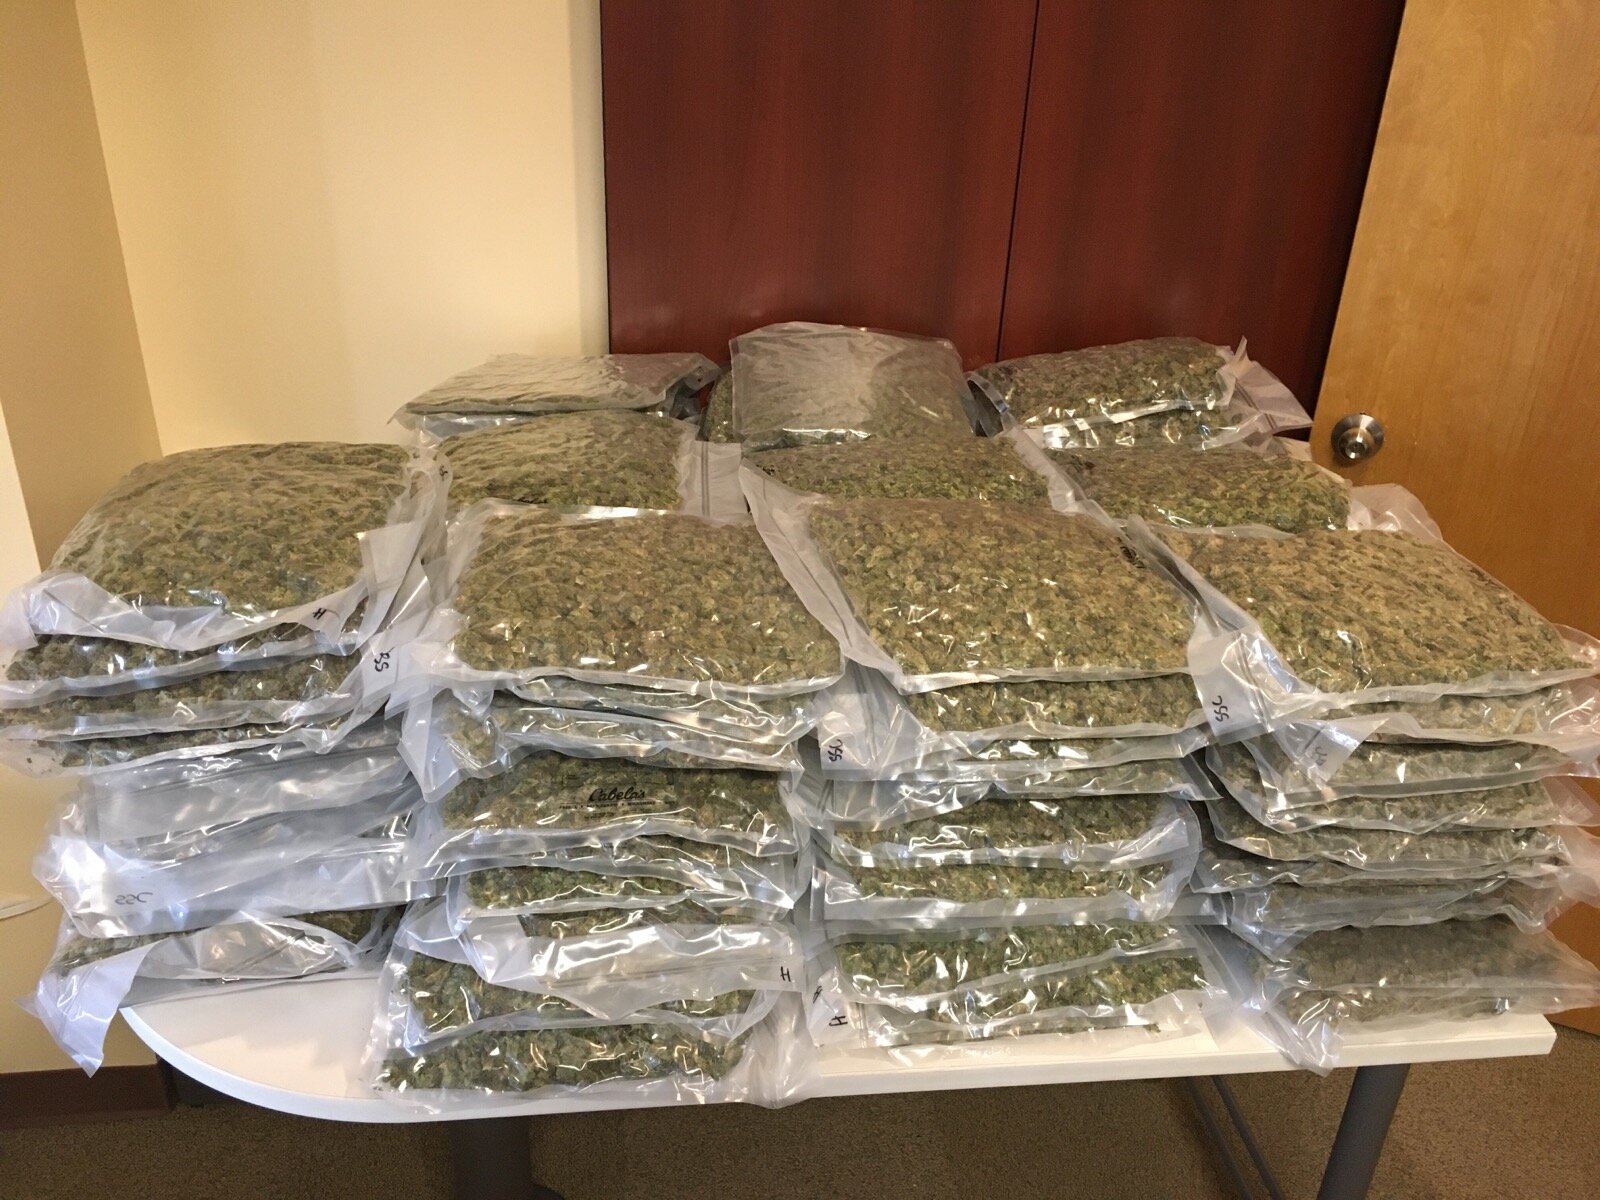 Dealing During COVID-19: Marylander With 100 Pounds of Cannabis Arrested